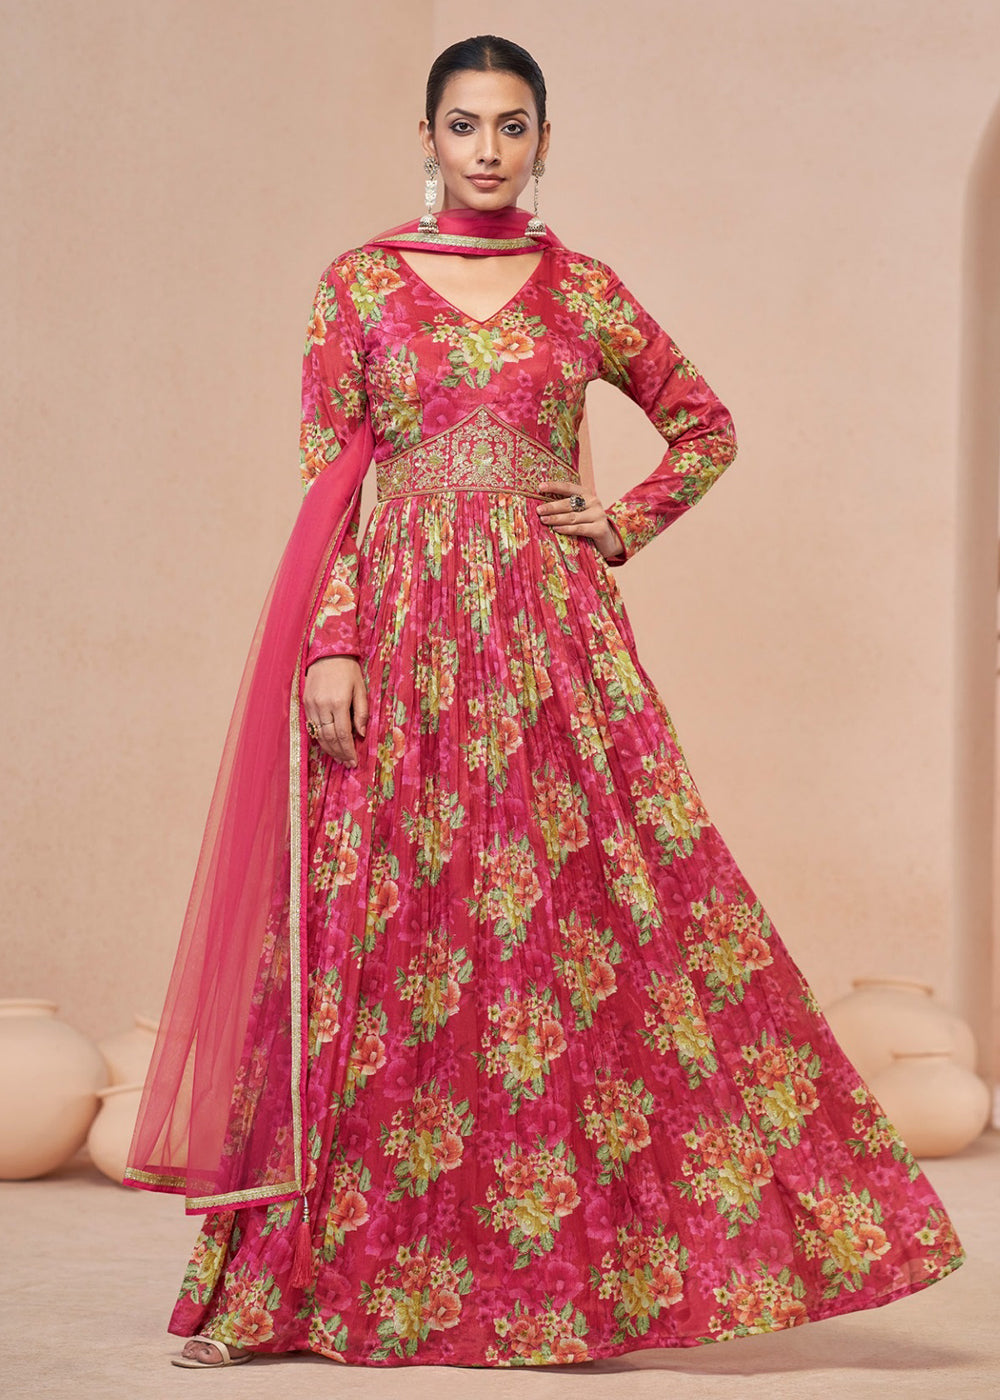 Buy Now Digital Printed Pink Embroidered Wedding Anarkali Gown Online in USA, UK, Australia, New Zealand, Canada & Worldwide at Empress Clothing.